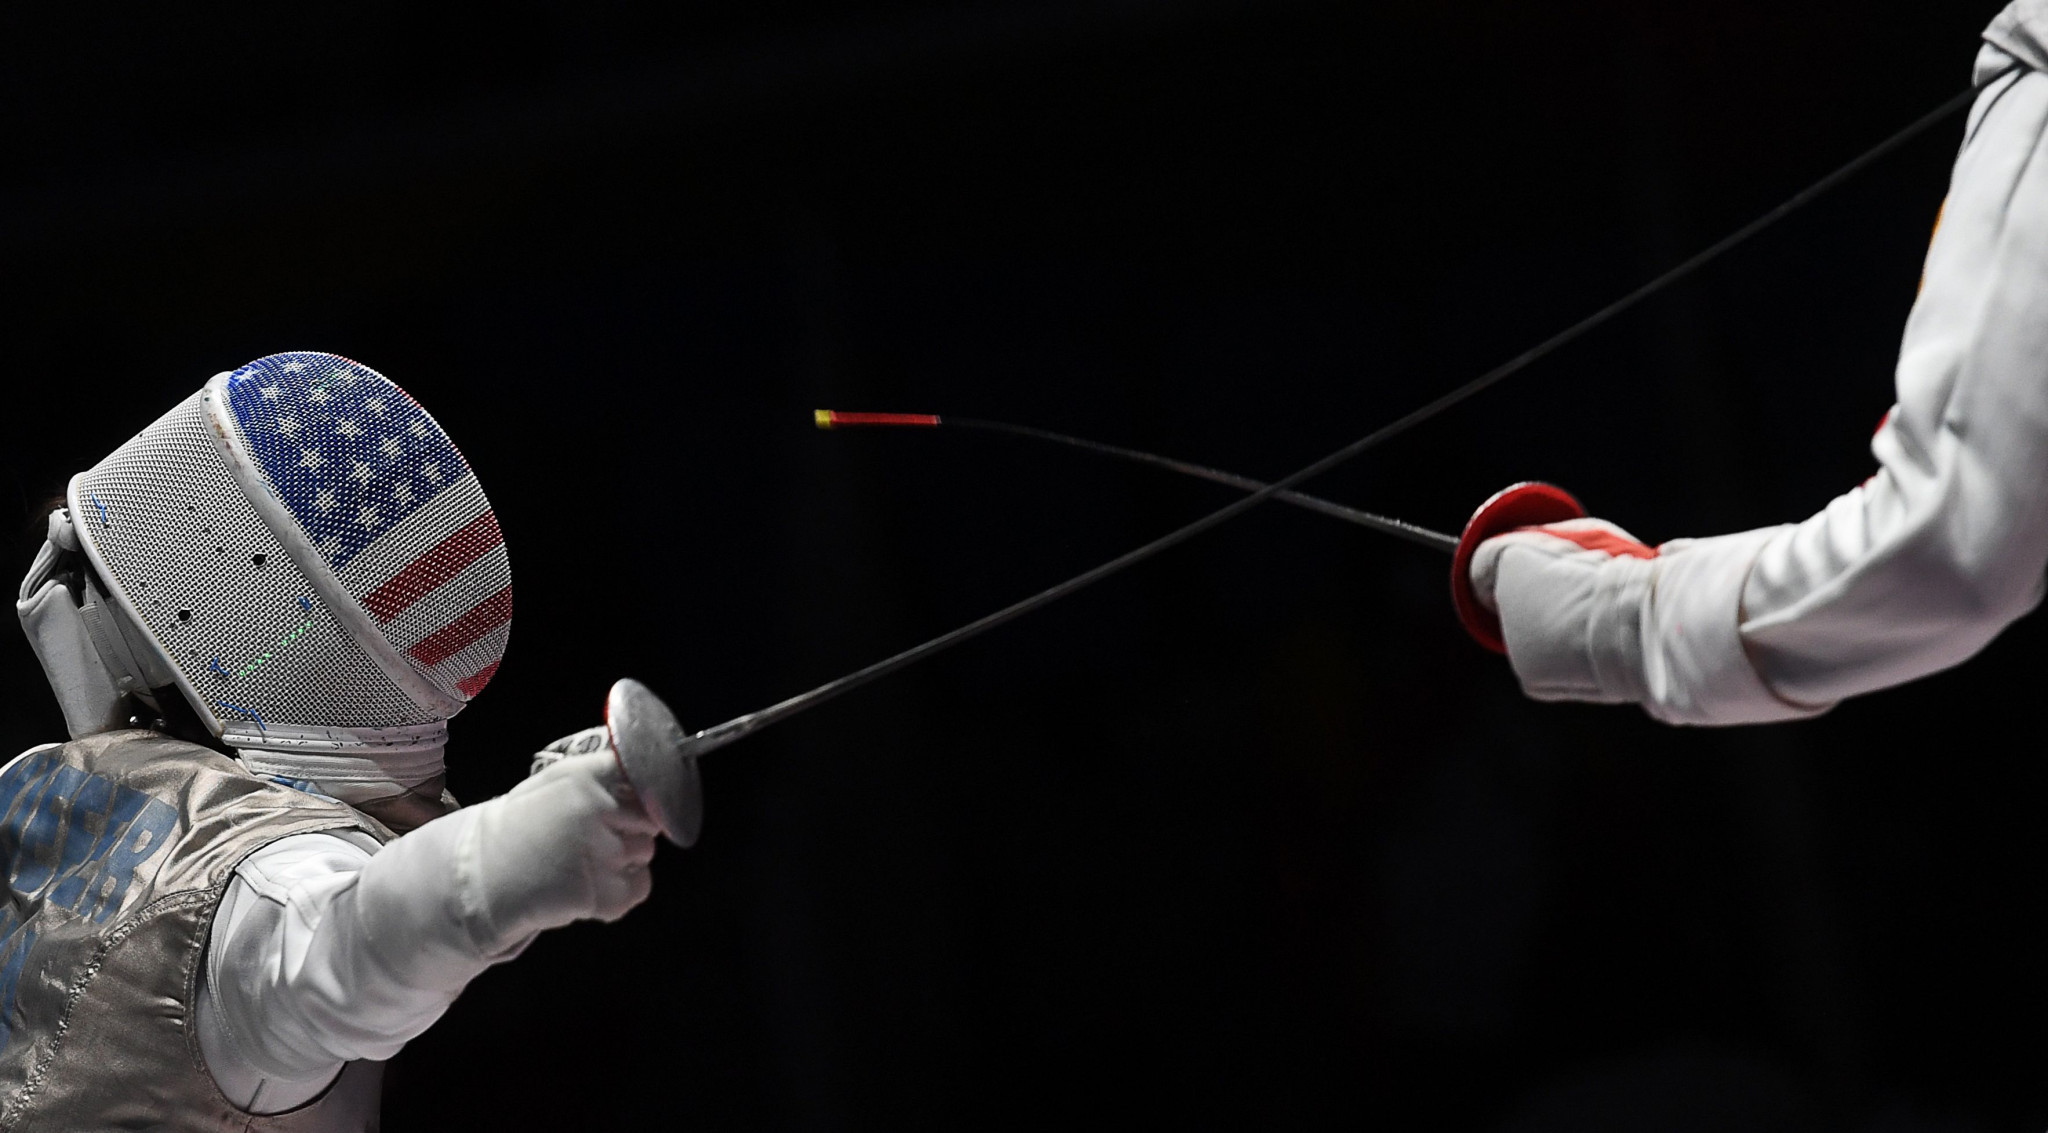 Kiefer retains women's foil title at Pan American Fencing Championships for ninth straight year